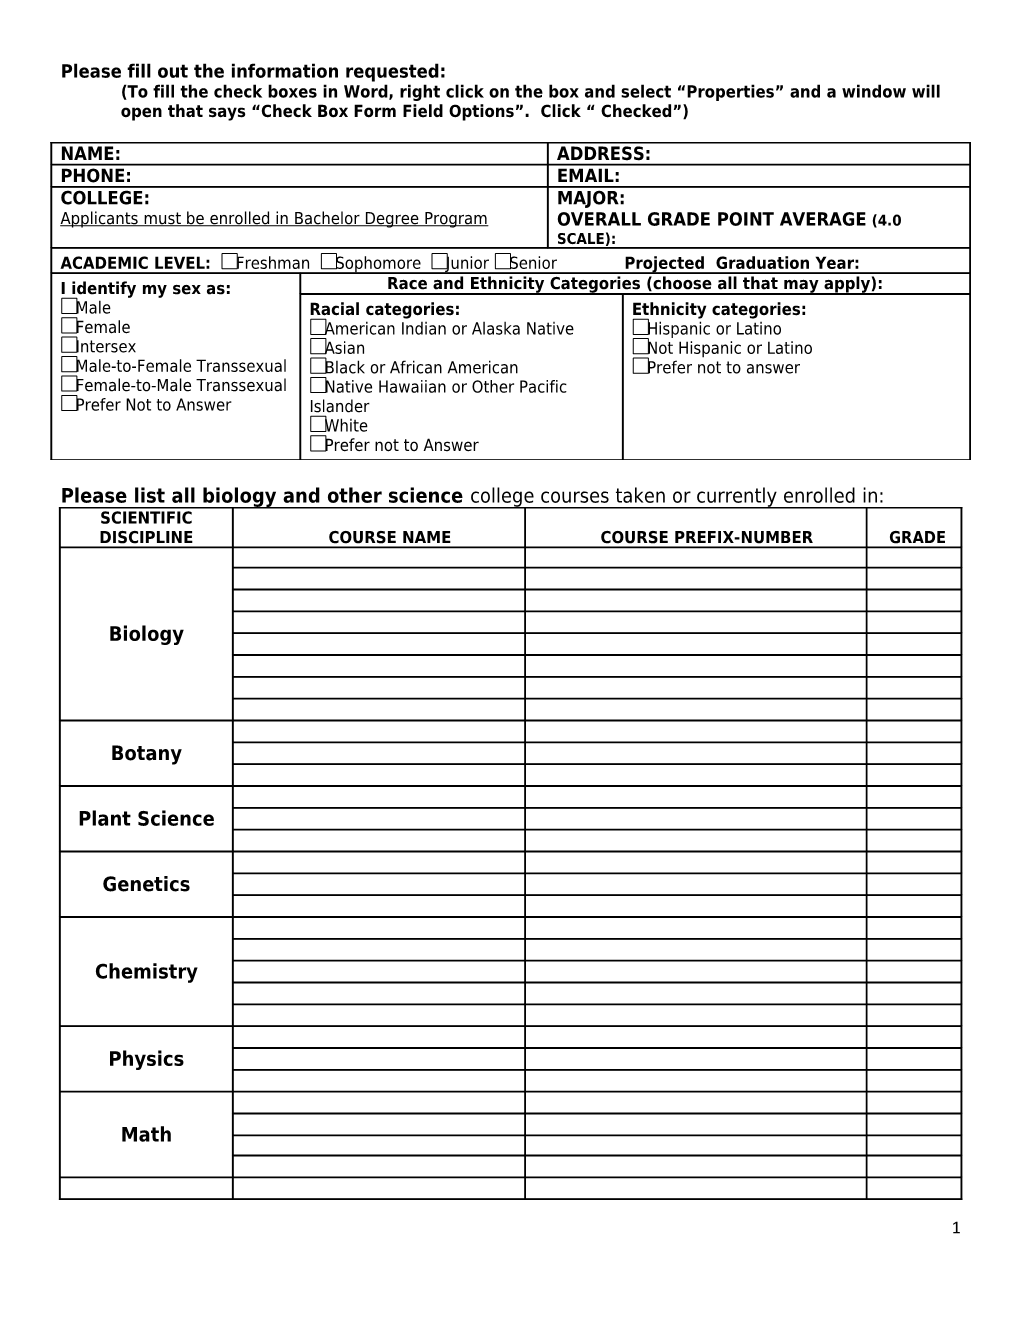 Please Fill out the Information Requested